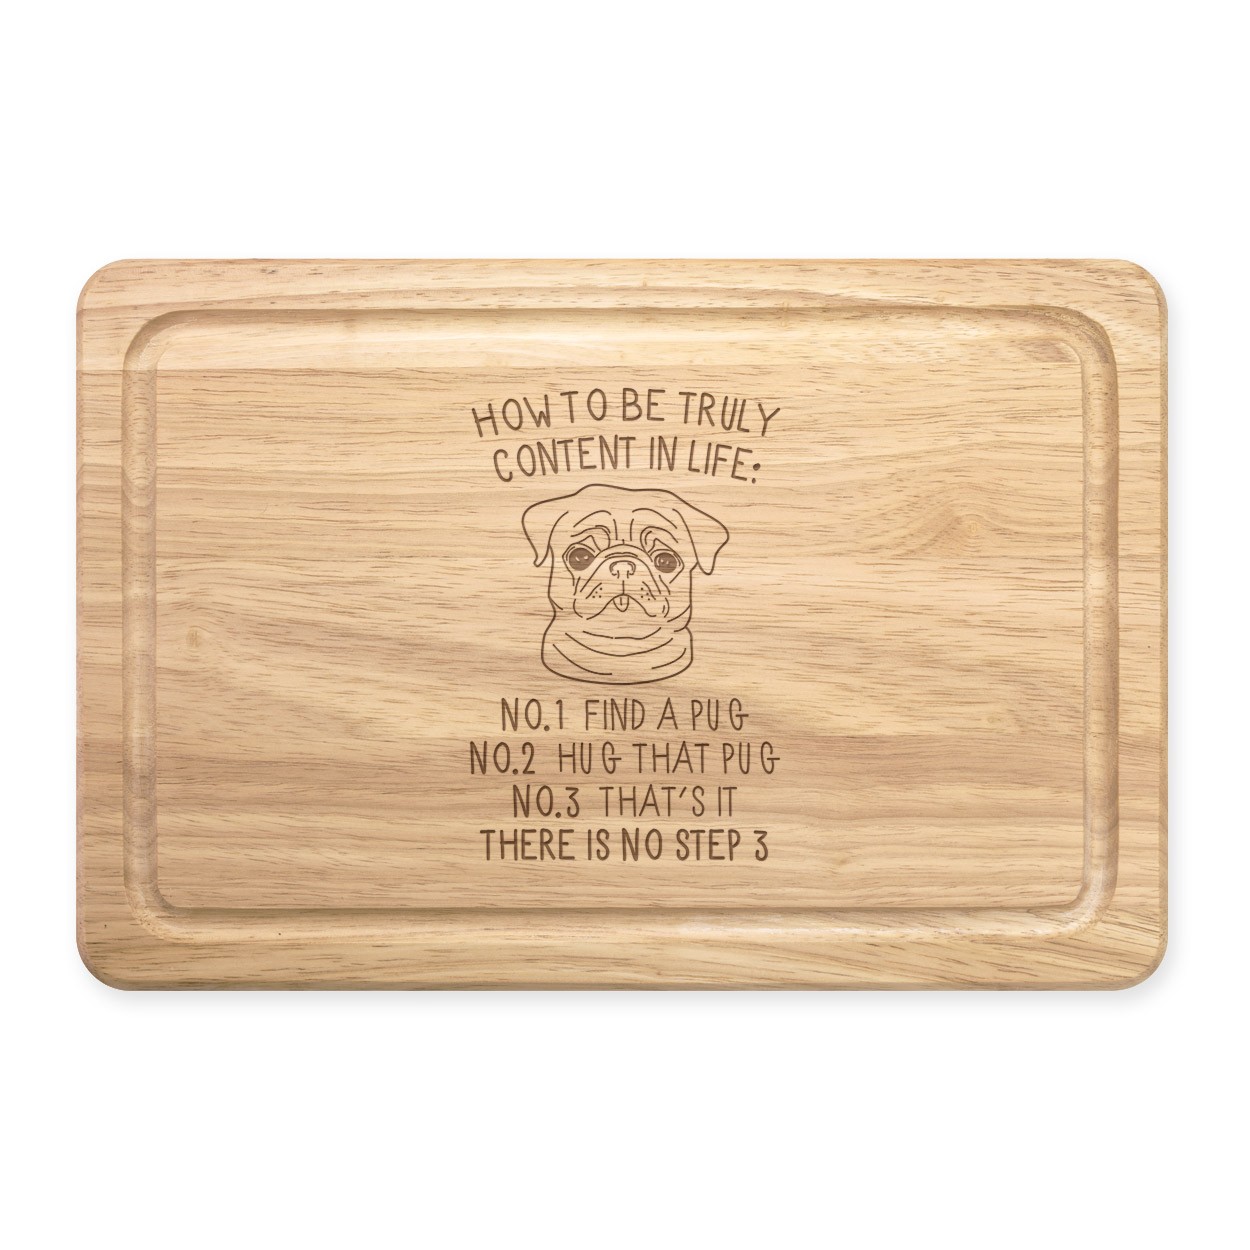 How To Be Truly Content In Life Pug Rectangular Wooden Chopping Board